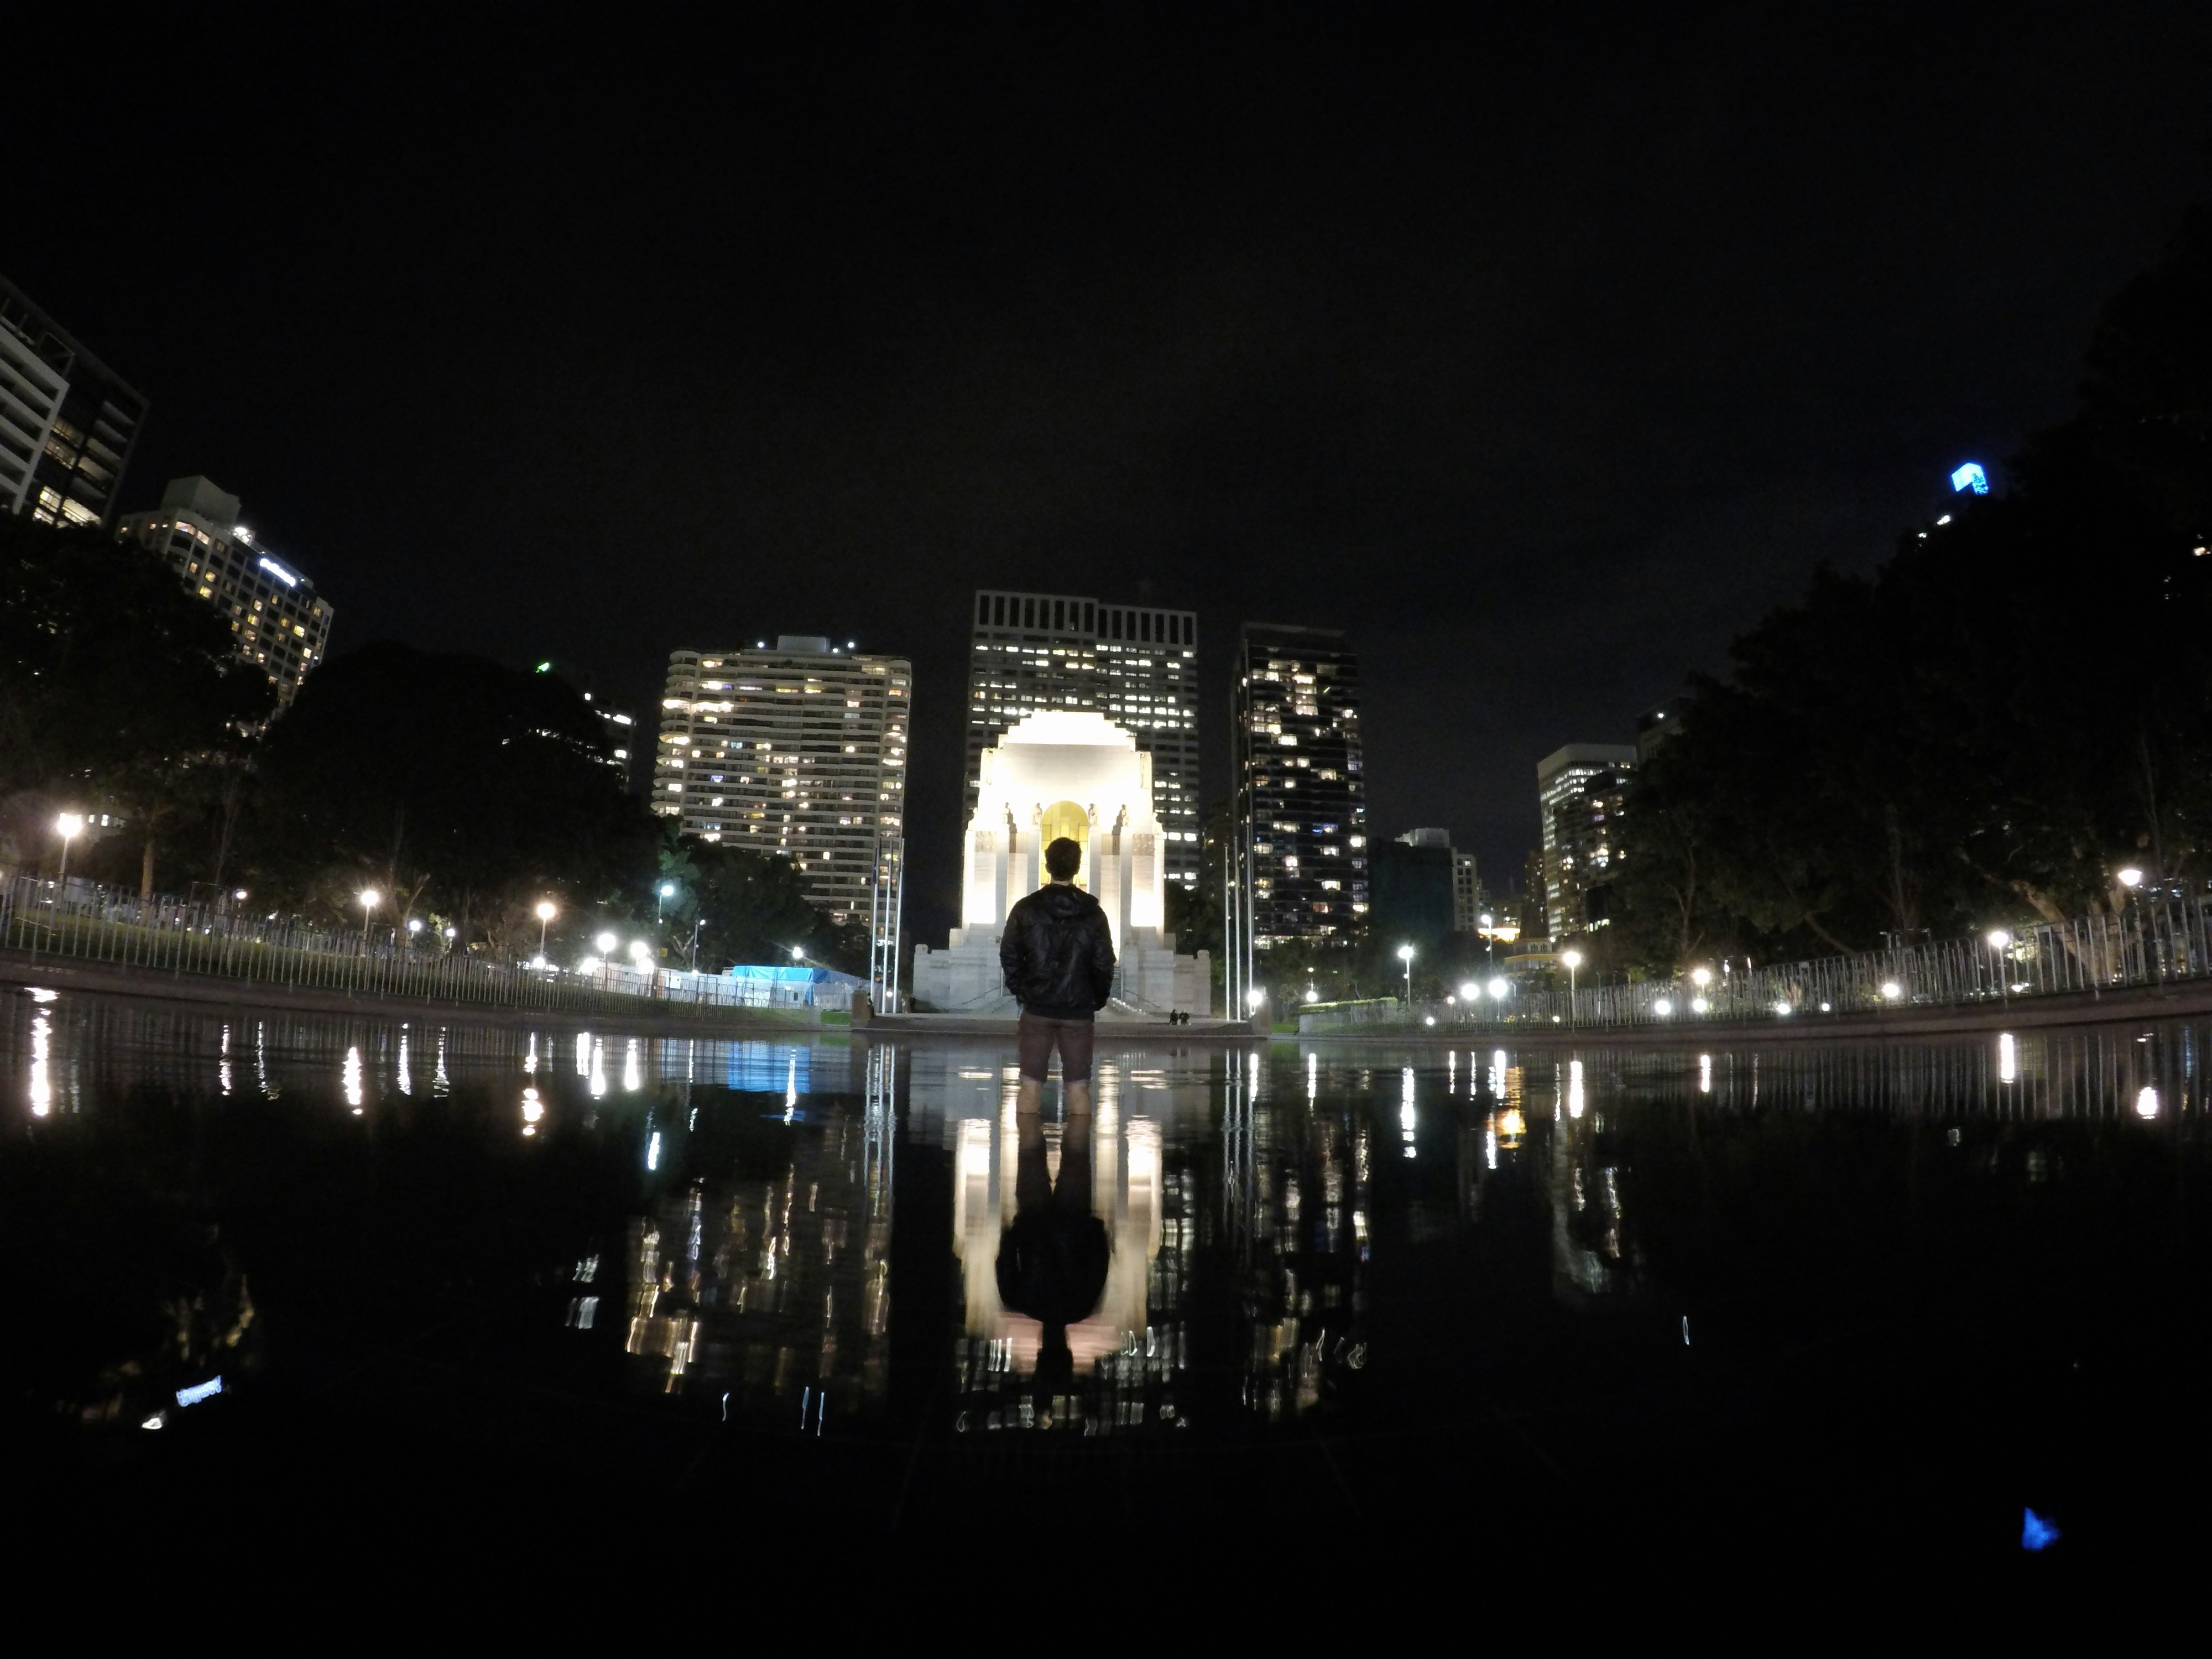 A man wearing a backpack and standing inside a city fountain.